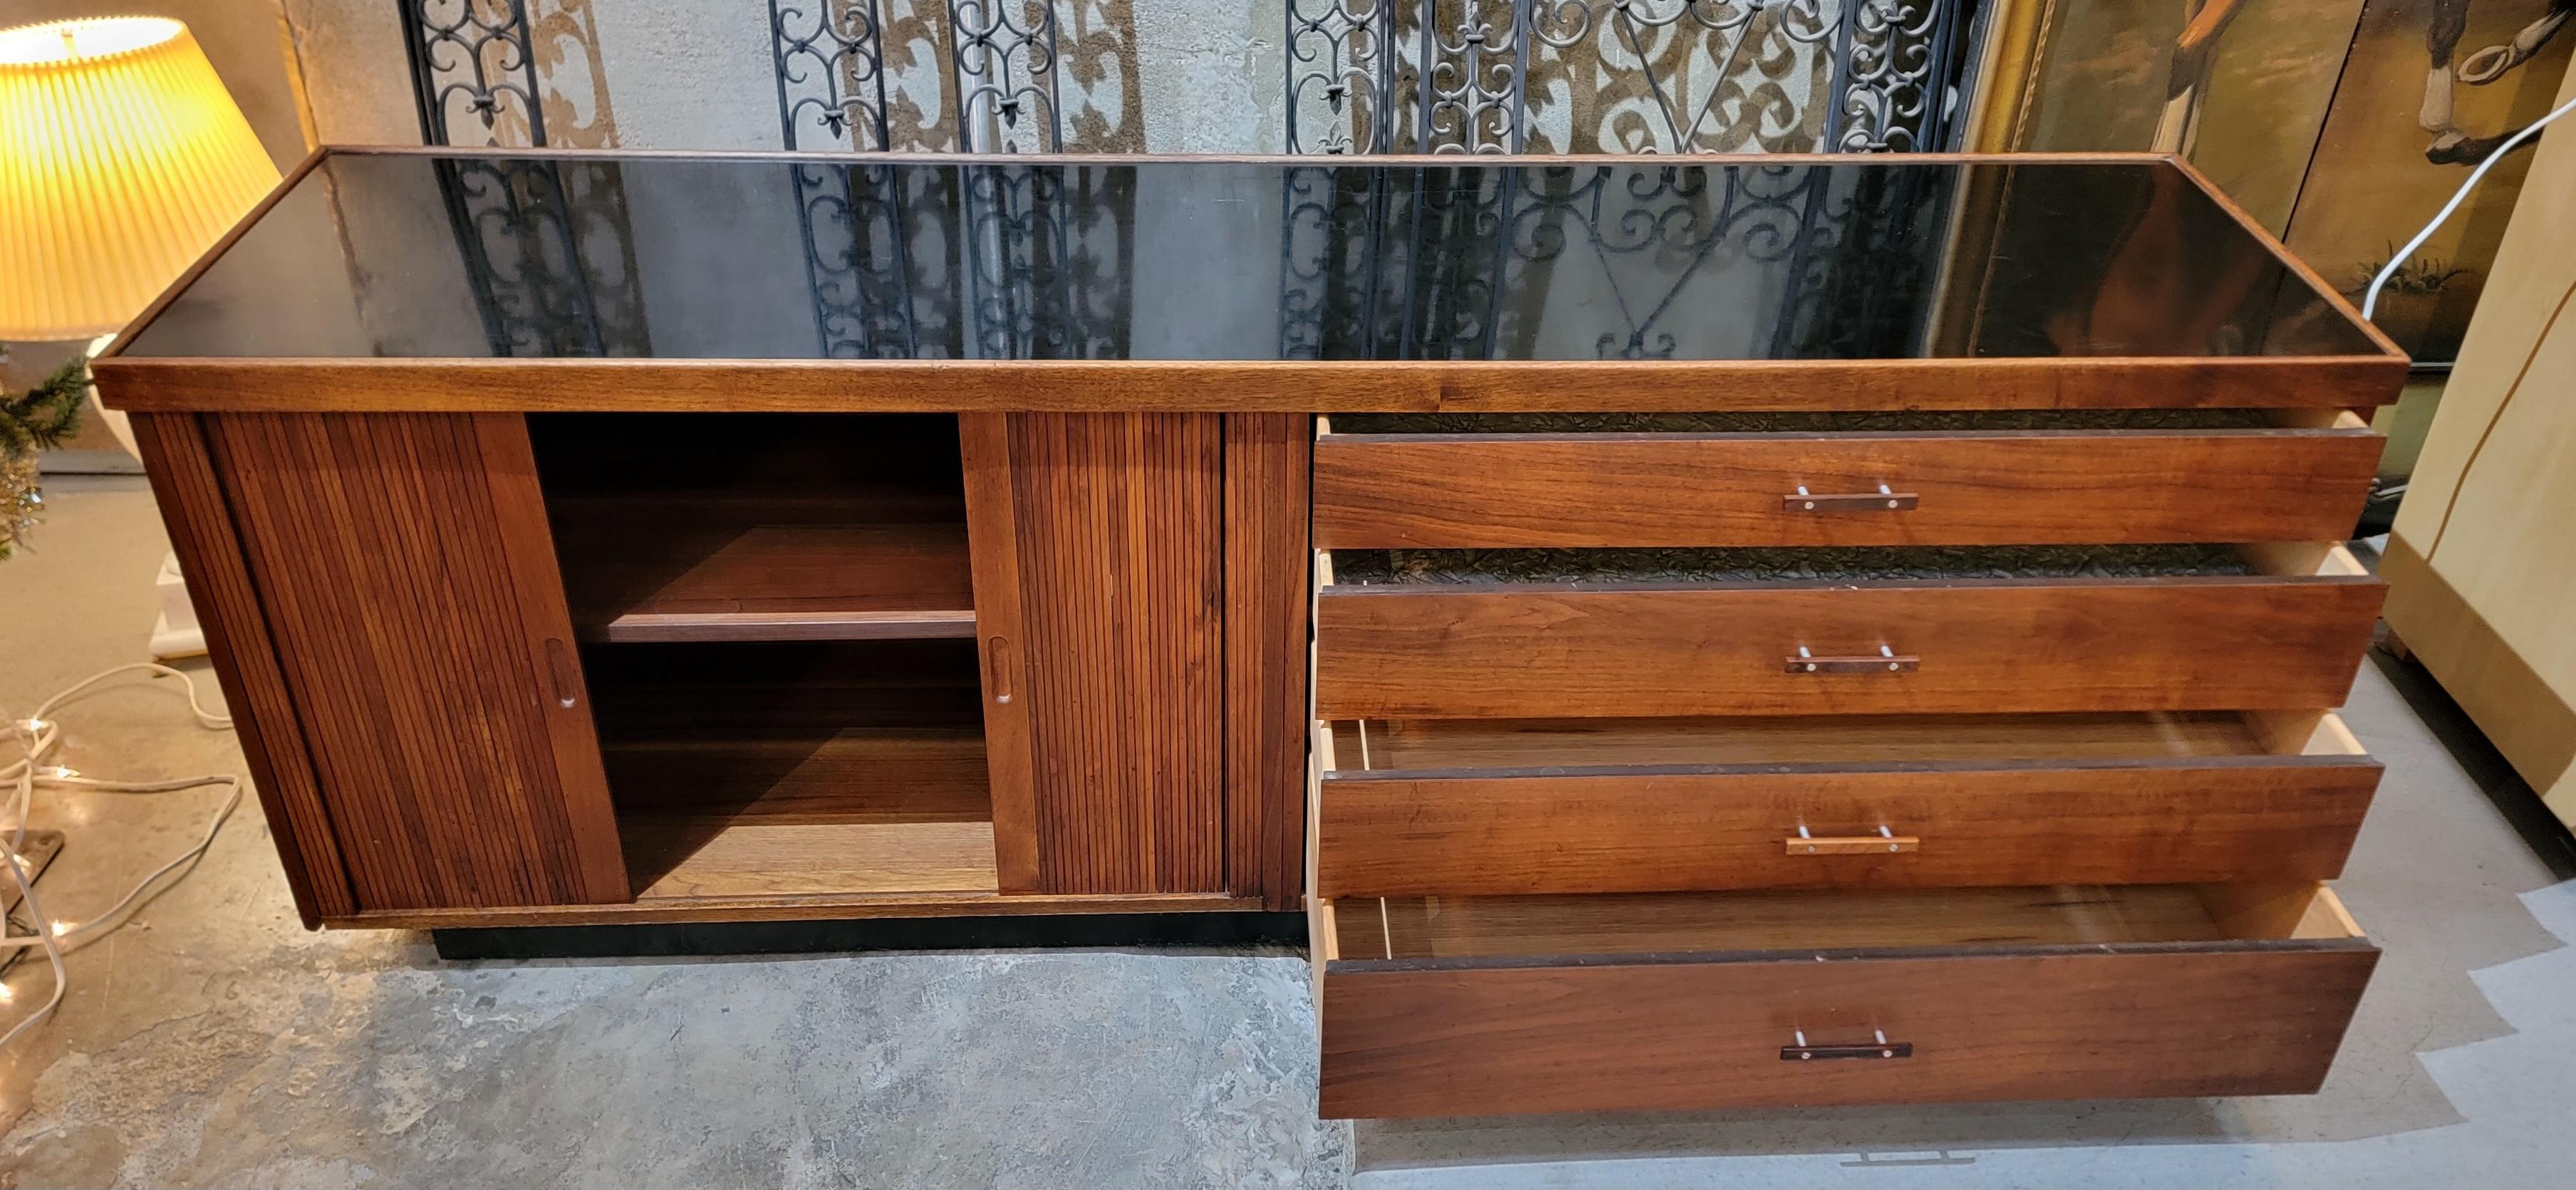 Tambour Door Credenza by Milo Baughman for Glenn of California For Sale 3